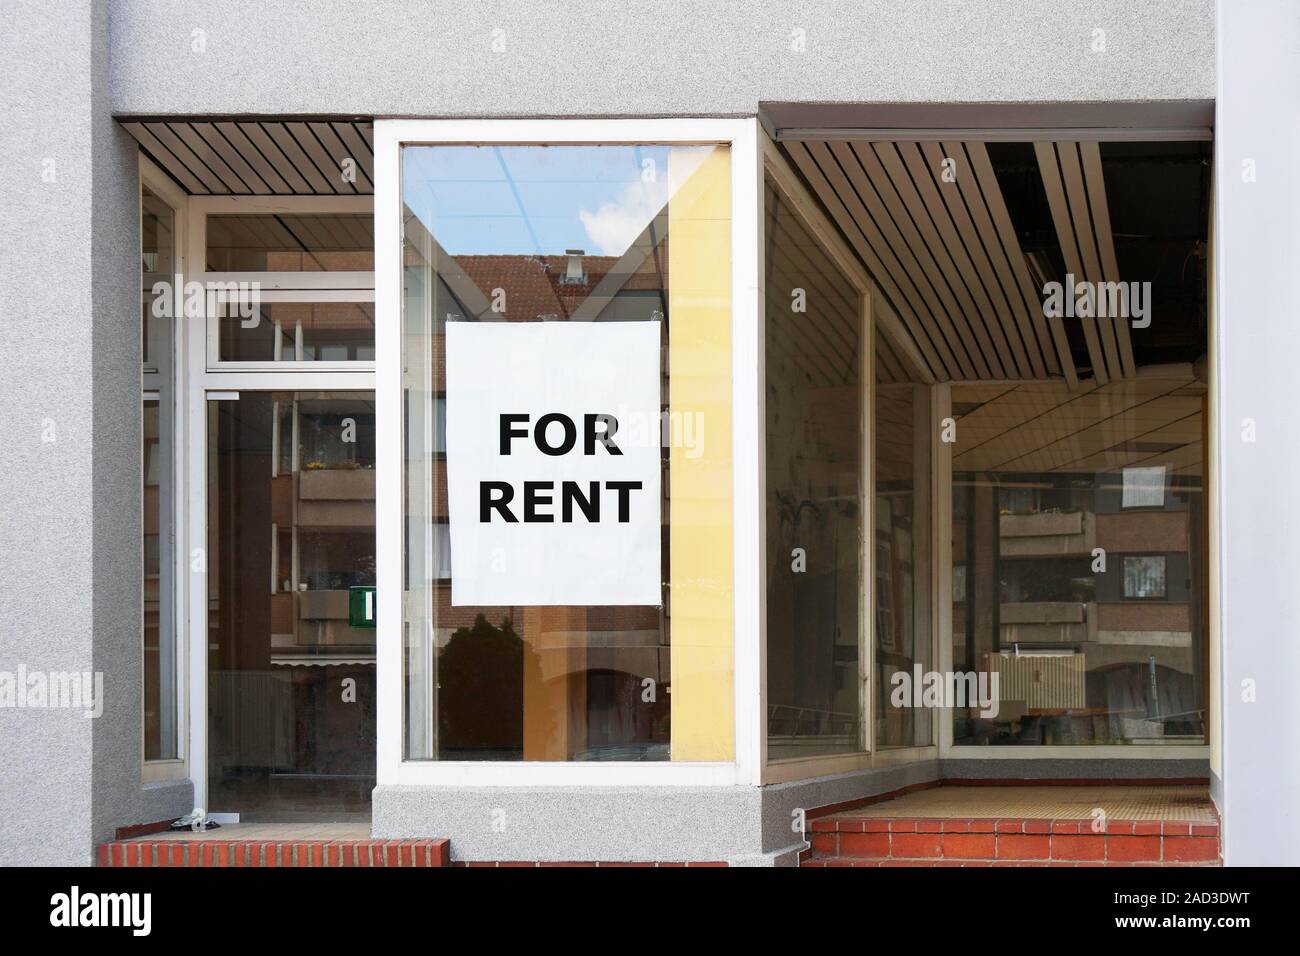 for rent sign in empty shop window Stock Photo